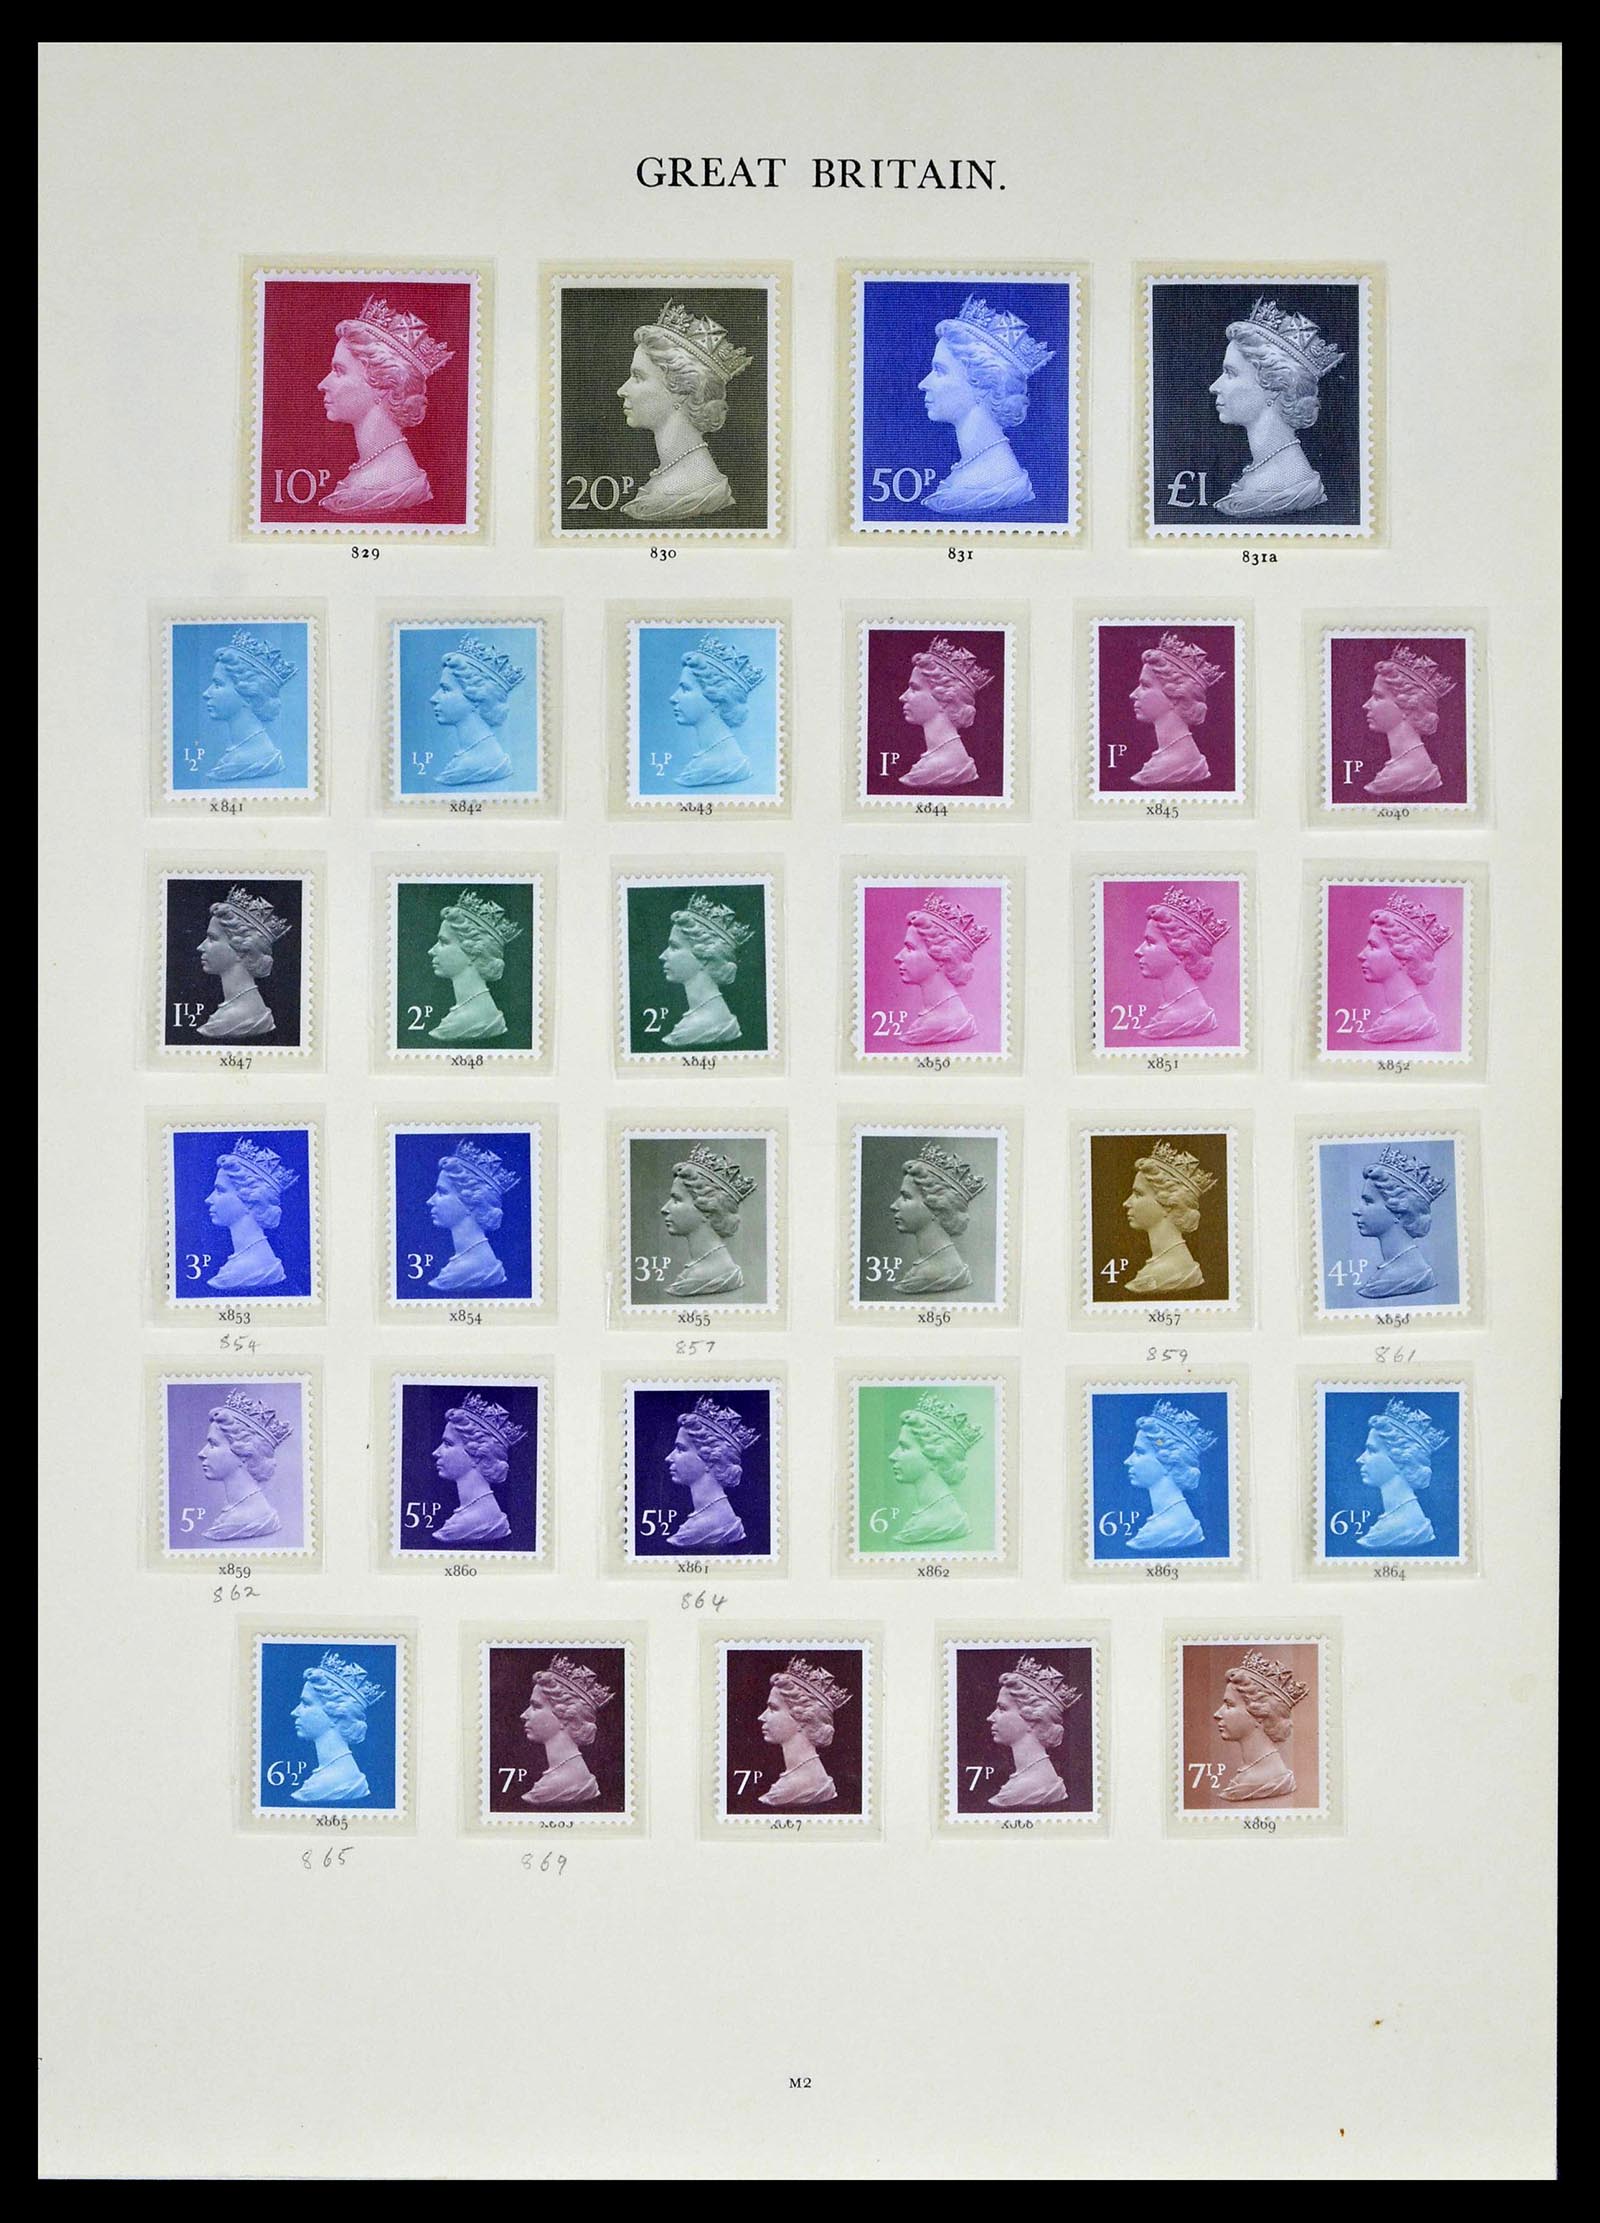 39025 0126 - Stamp collection 39025 Great Britain specialised 1840-1990.